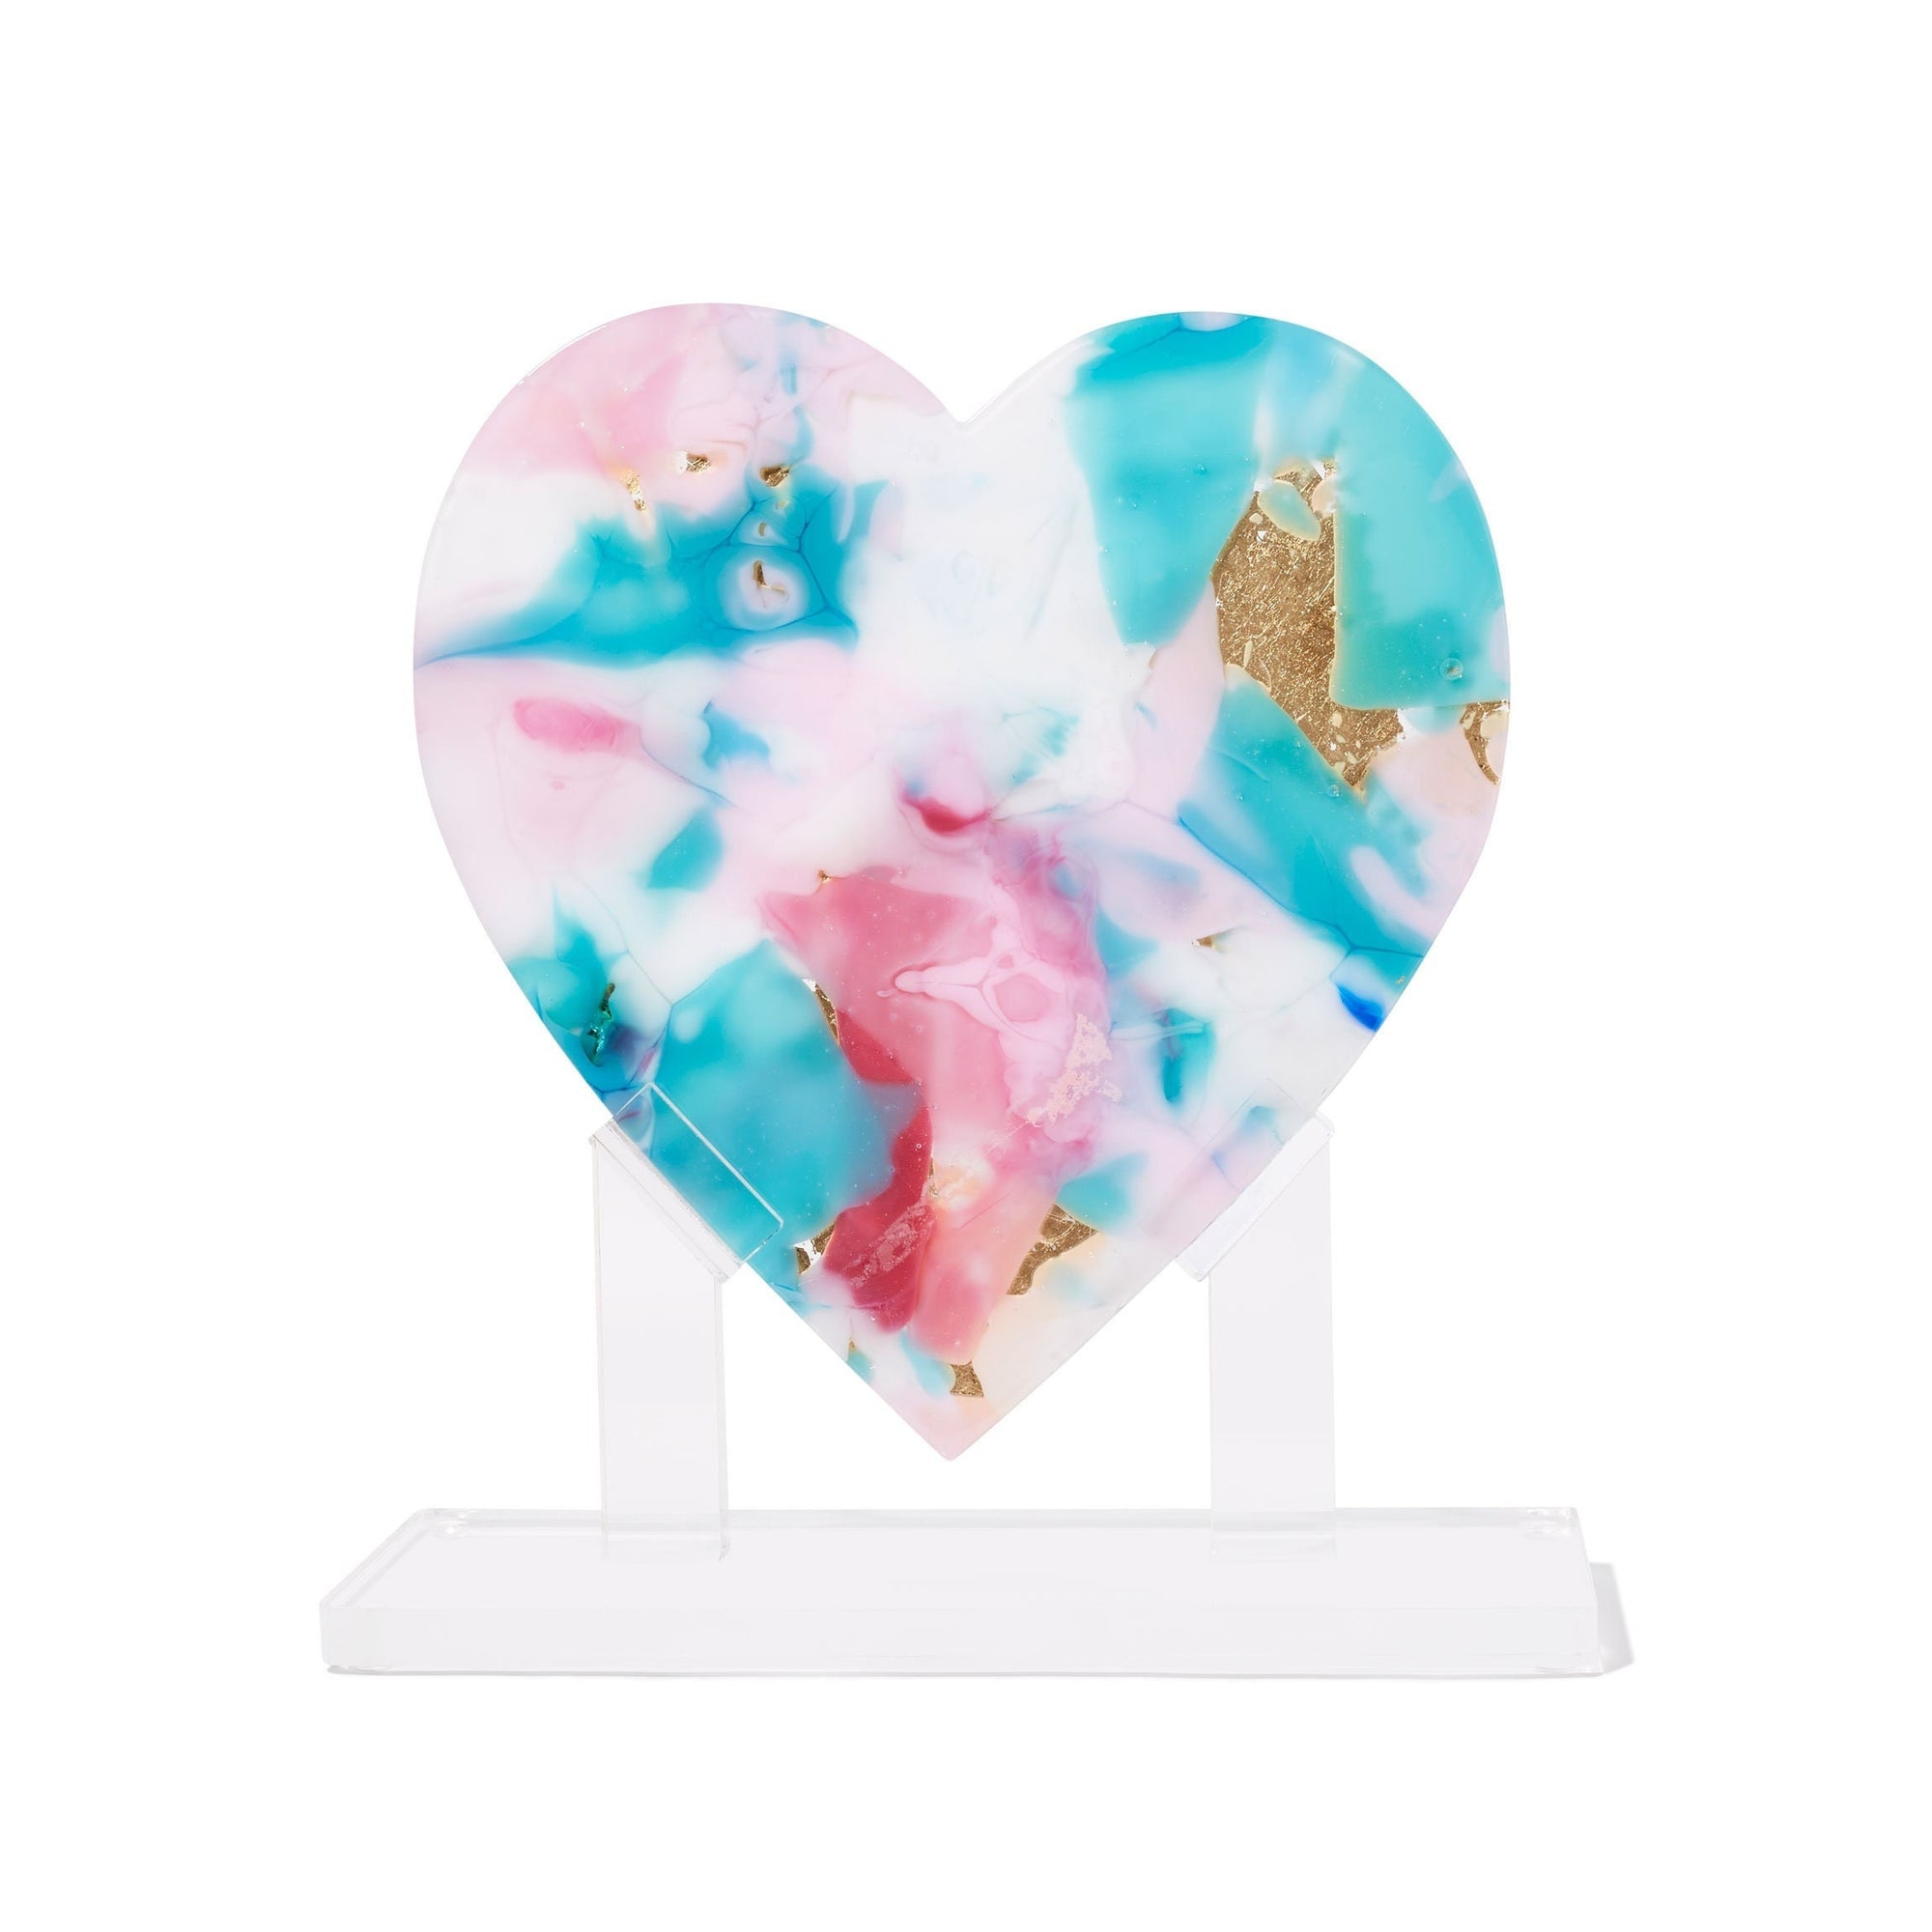 Tiffany's Heart Sculpture, Large #25